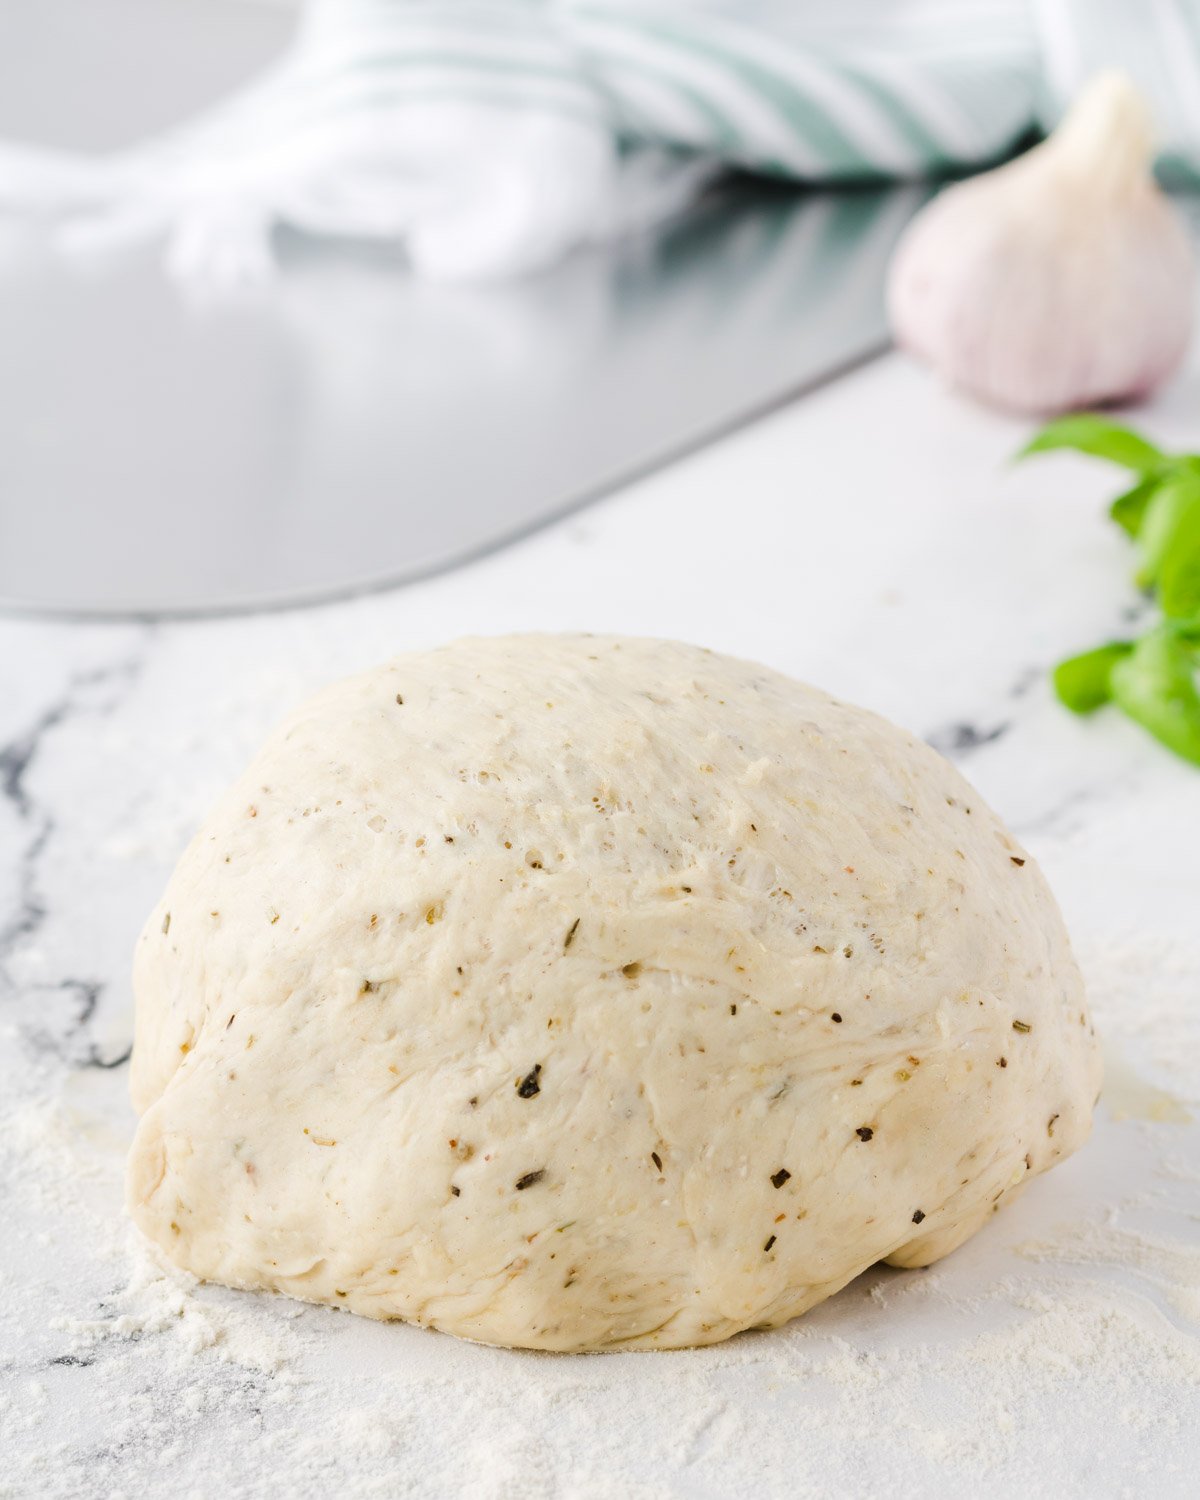 Ball of garlic and herb pizza dough.